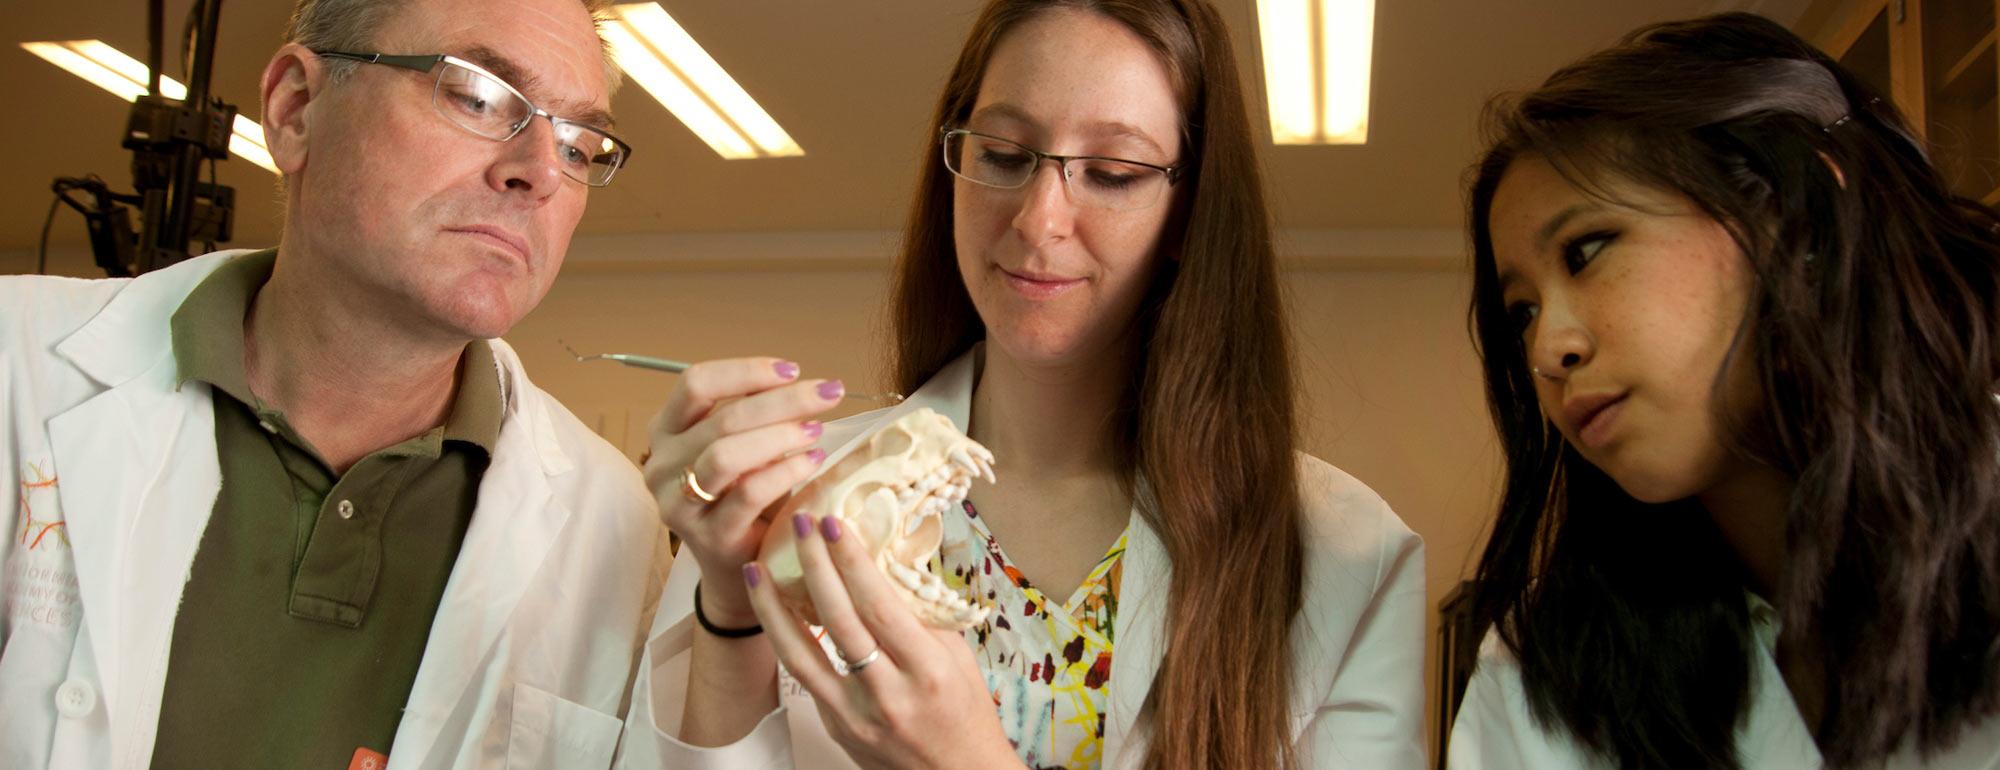 Two female students and their male professor examine an otter skull